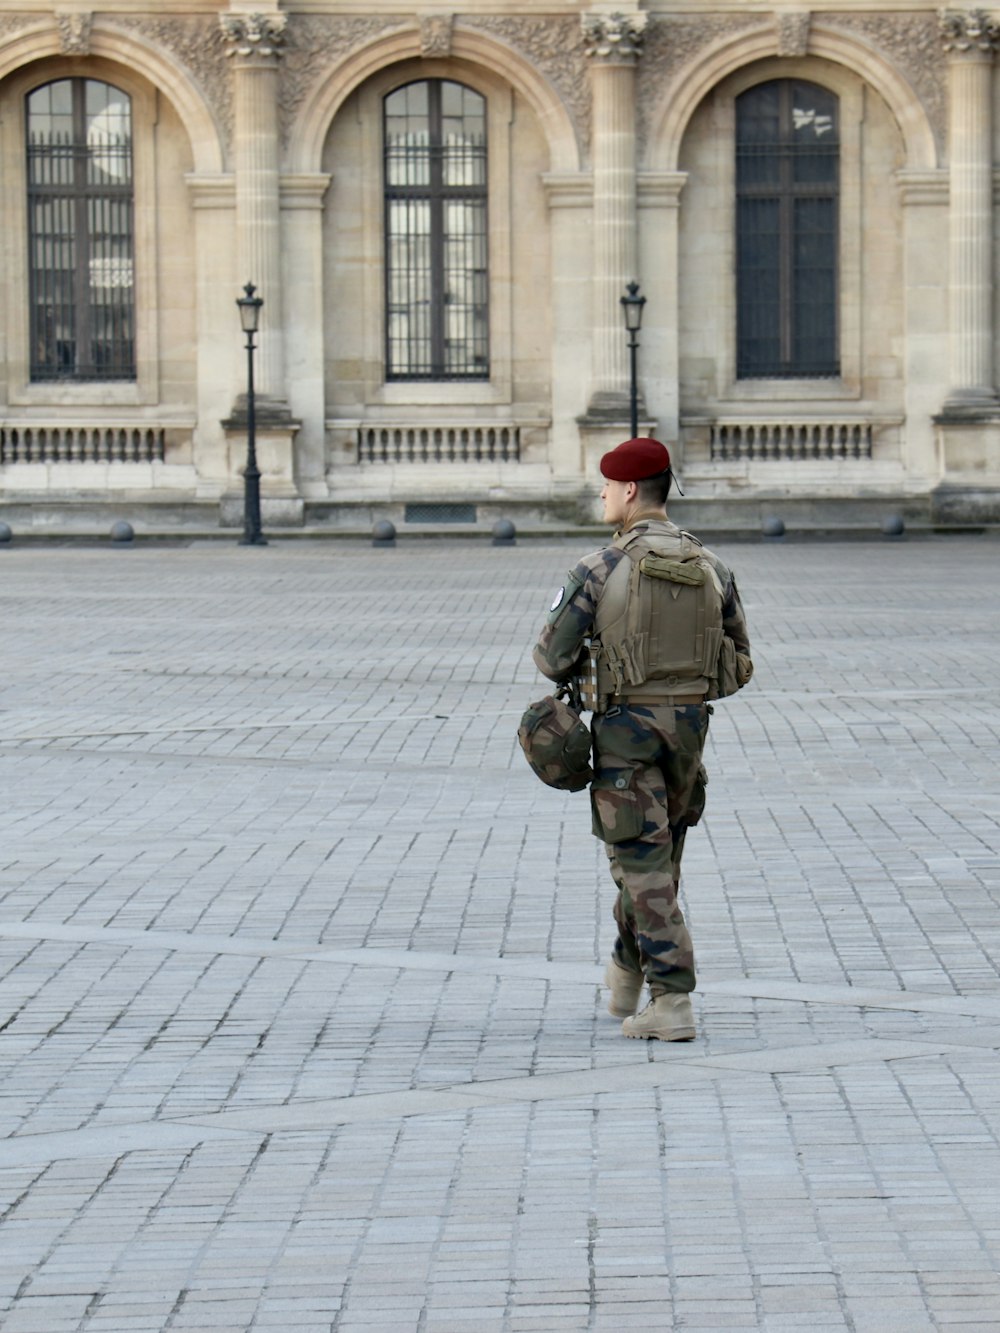 a person in military uniform walking in front of a building